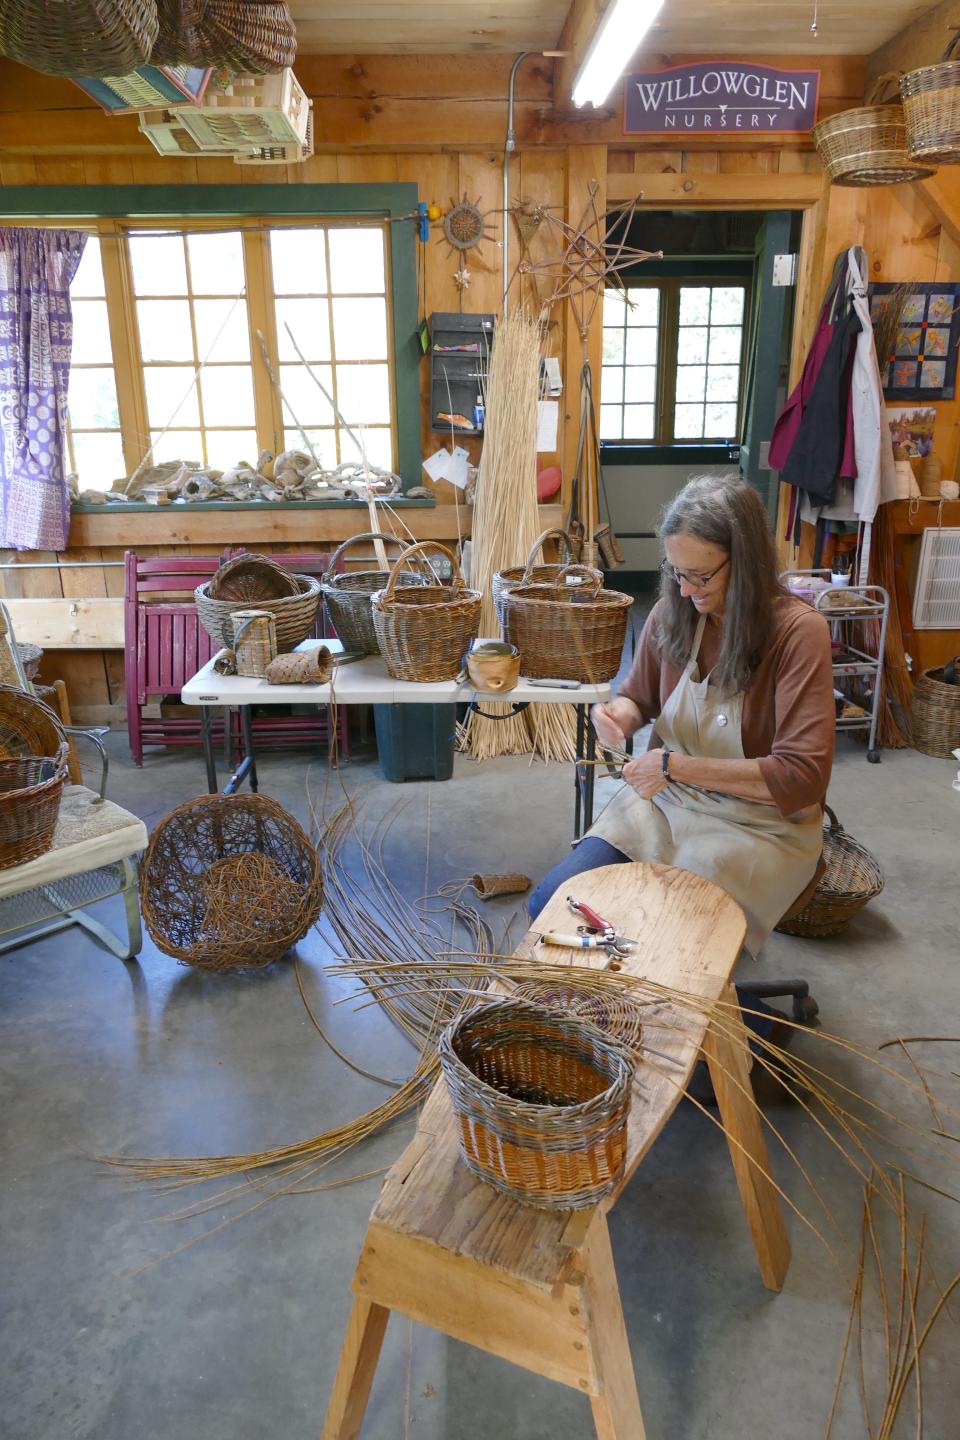 Lee Zieke begins work on a basket base using a simple twining method. “The thing that really got me about Willow is the texture and the patterns,” she says. The simple tools they use for cutting and weaving Willow are similar to those used by European basketmakers for generations. The handcrafted workbench is based on models Zieke saw in the Amanas.